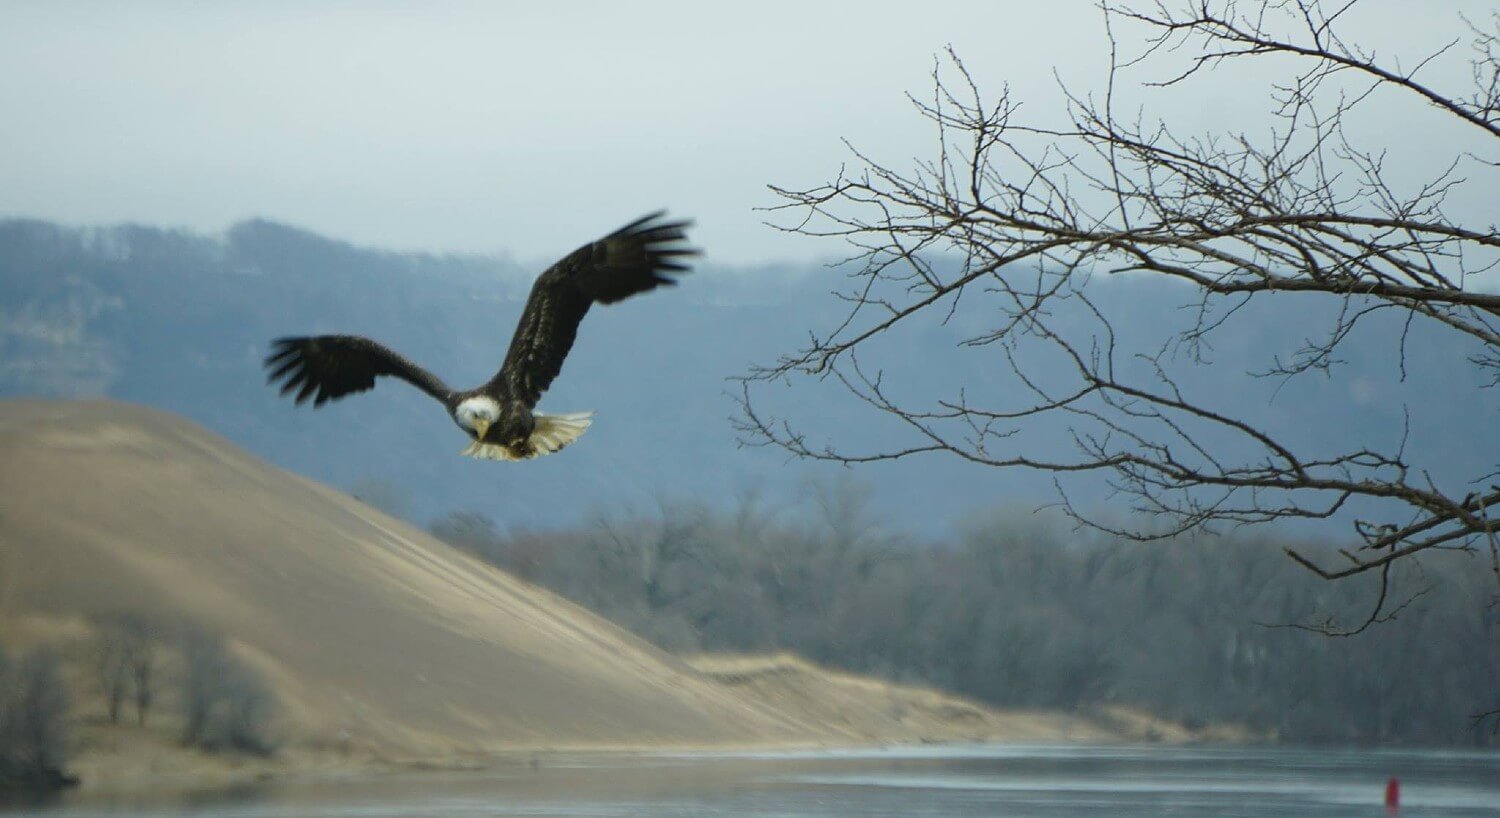 Large bald eagle in mid flight over a river with trees in the background